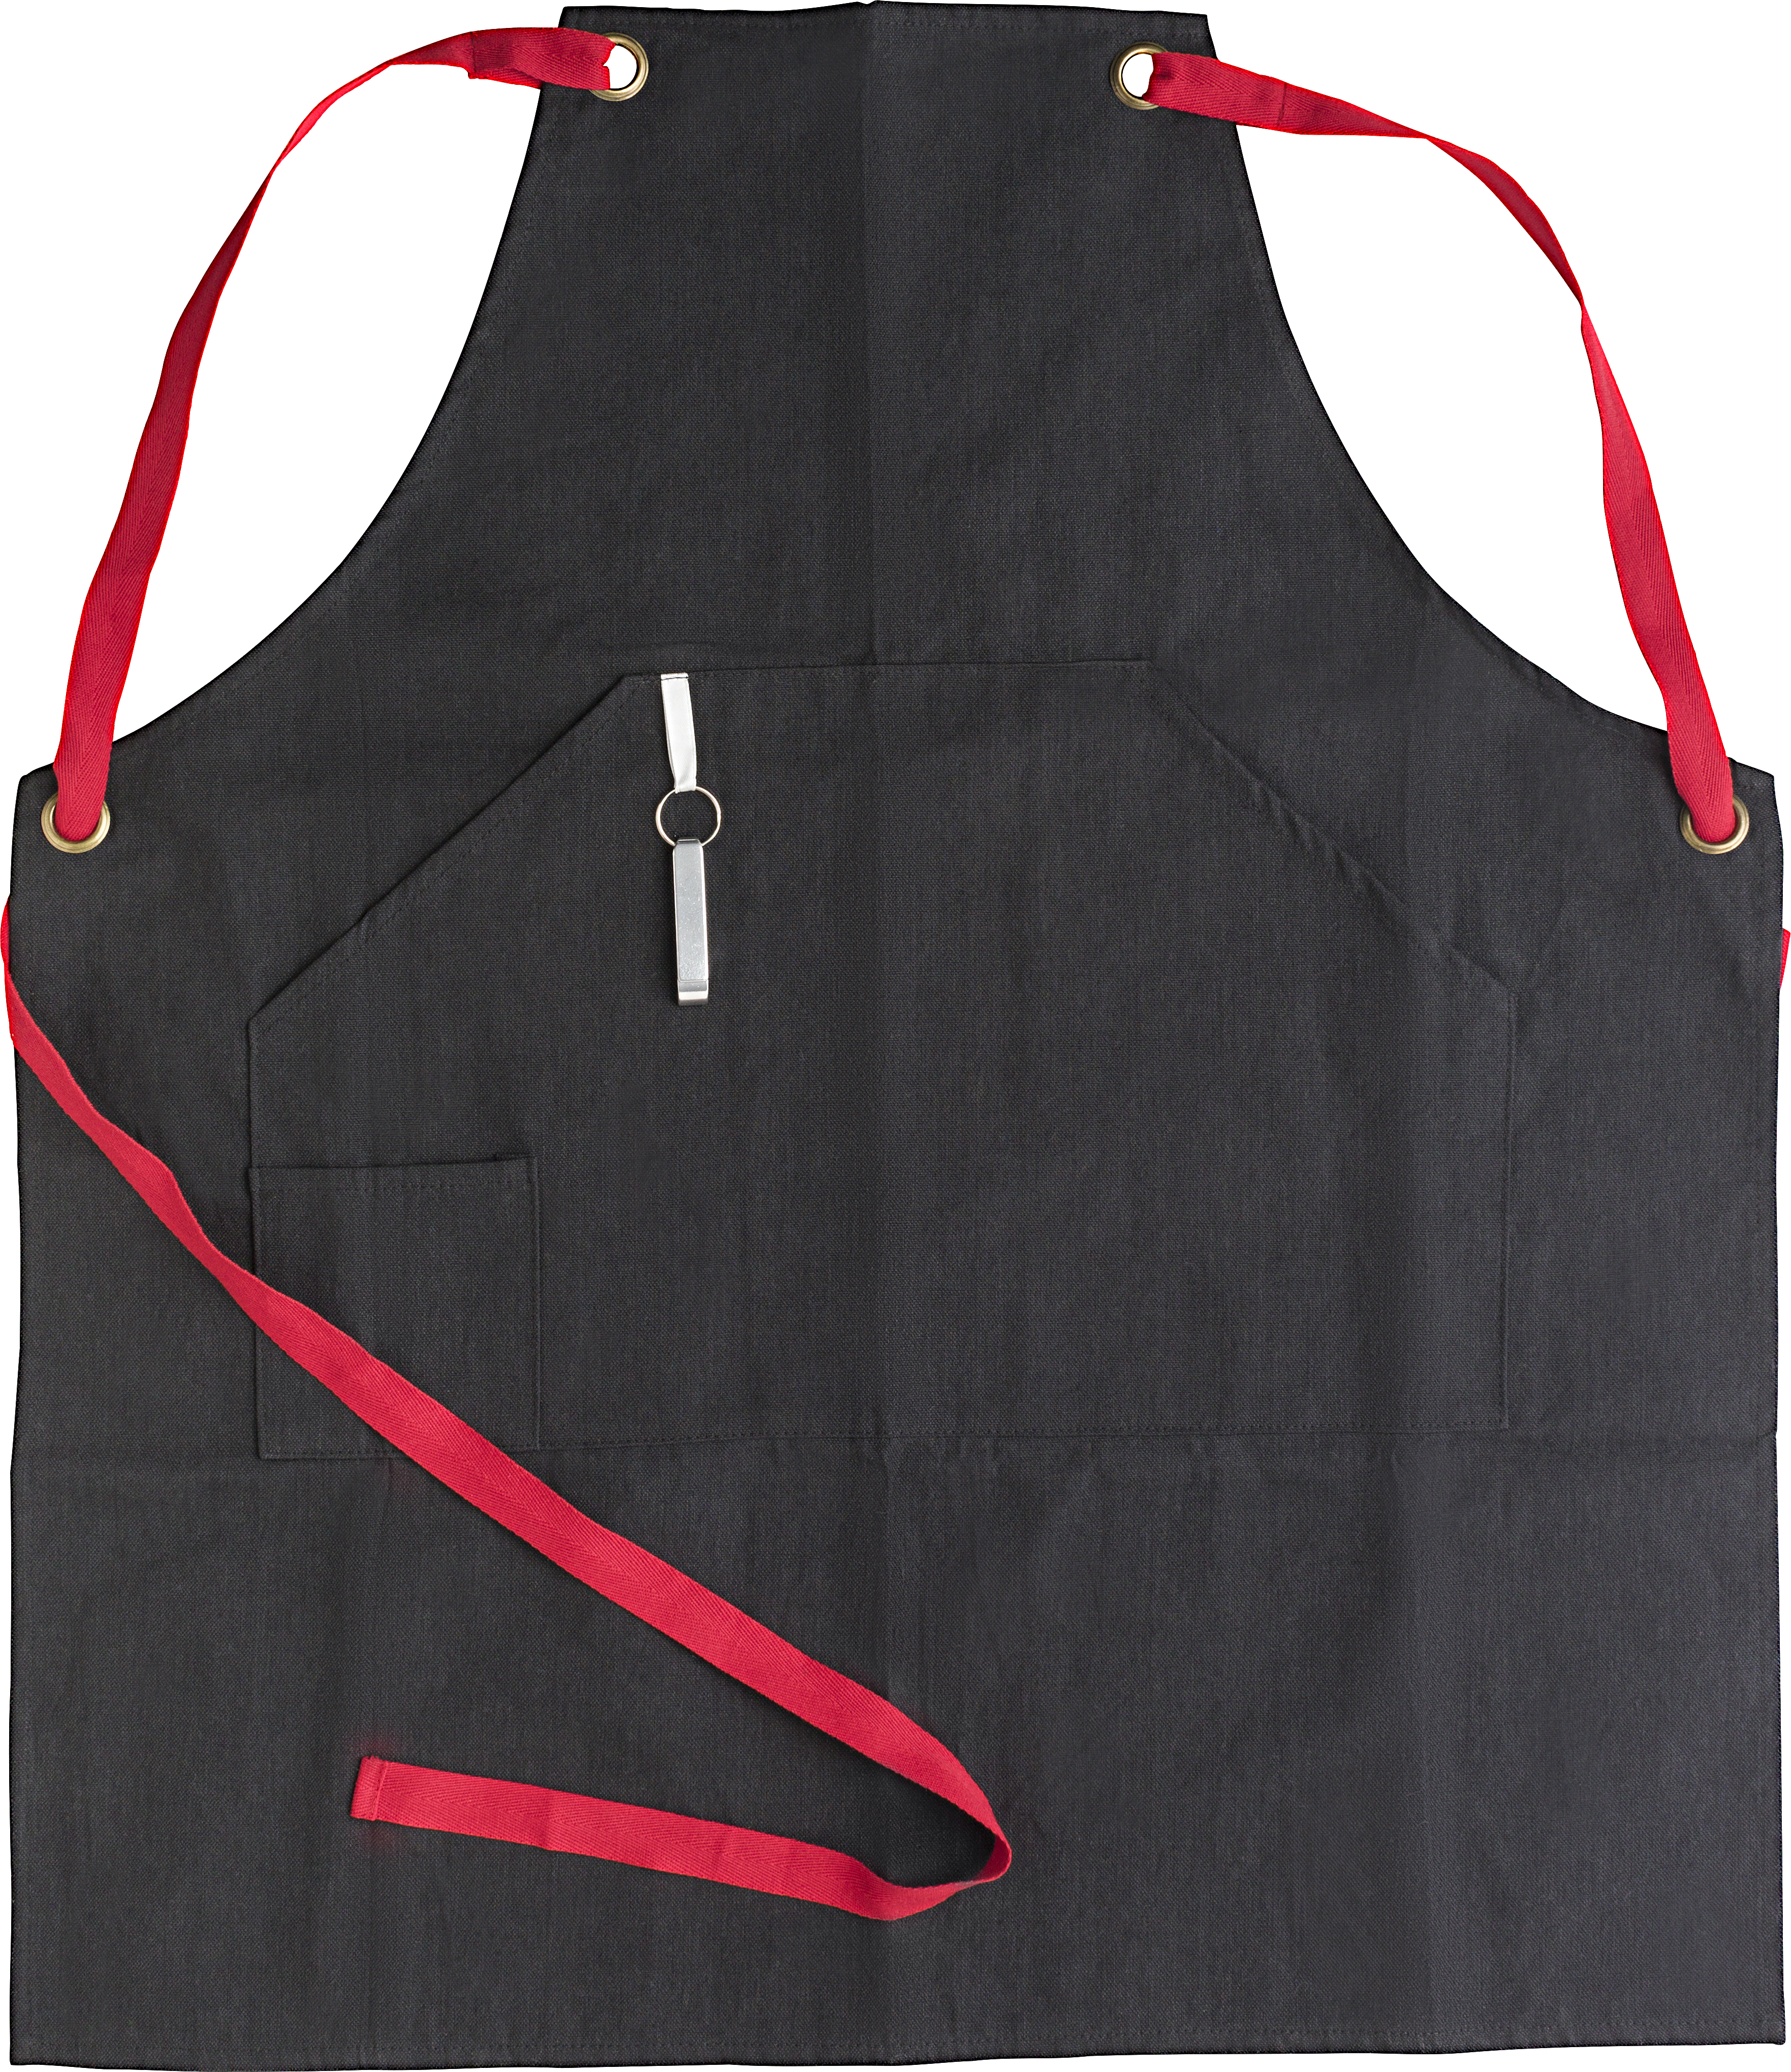 000000668059 008999999 2d090 frt pro01 2021 fal - Polyester and cotton apron